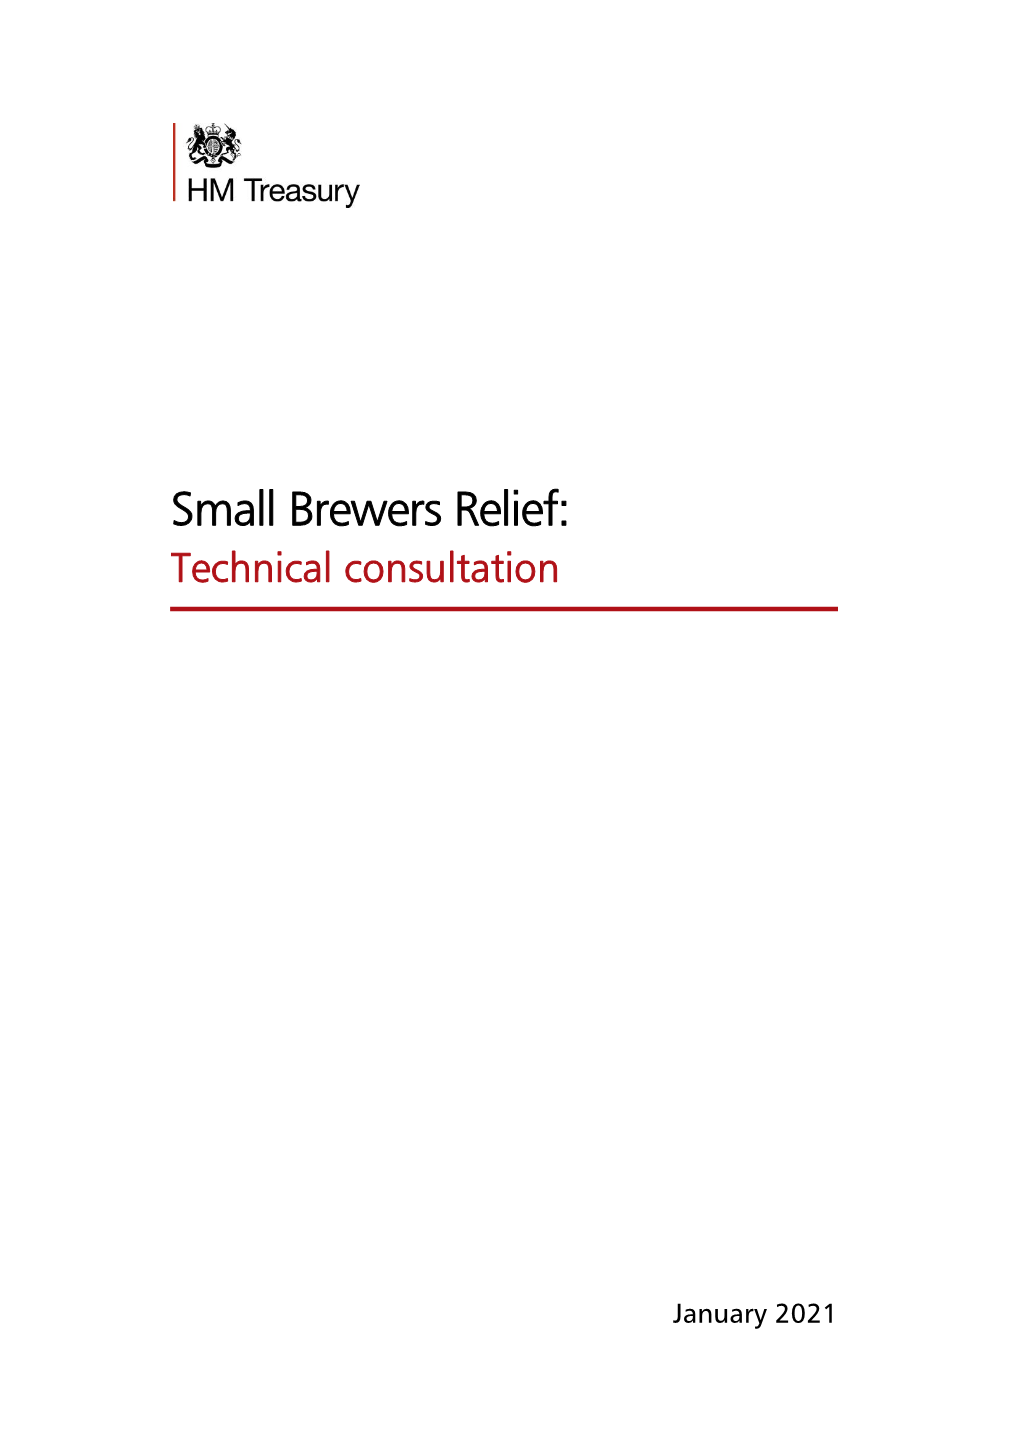 Small Brewers Relief: Technical Consultation